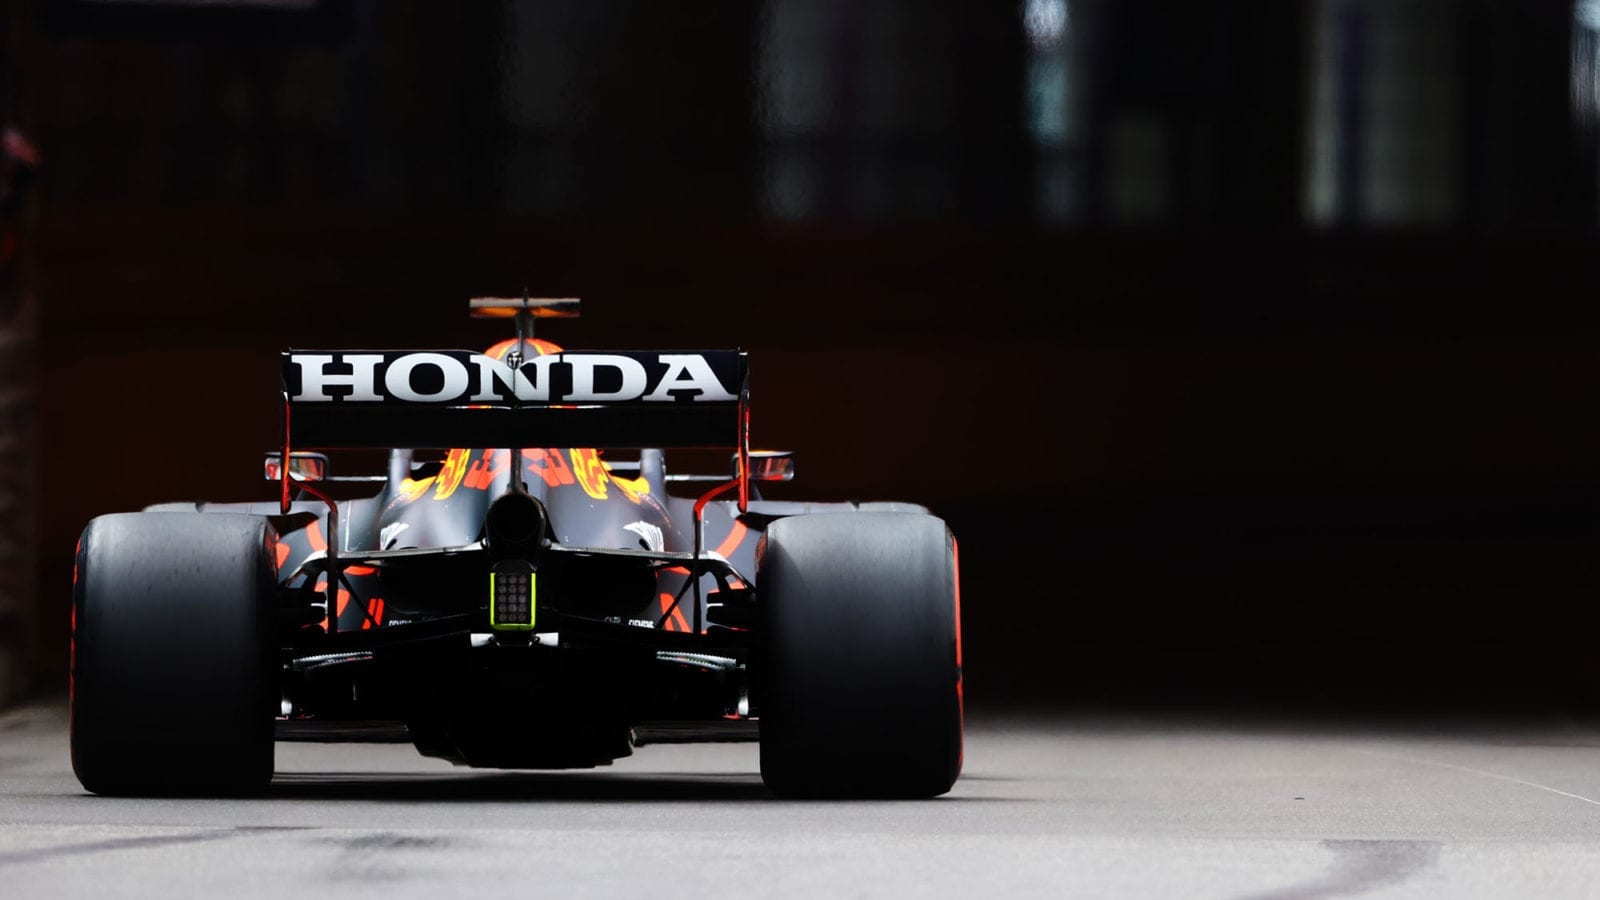 MONTE-CARLO, MONACO - MAY 22: Max Verstappen of the Netherlands driving the (33) Red Bull Racing RB16B Honda on track during final practice prior to the F1 Grand Prix of Monaco at Circuit de Monaco on May 22, 2021 in Monte-Carlo, Monaco. (Photo by Bryn Lennon/Getty Images)